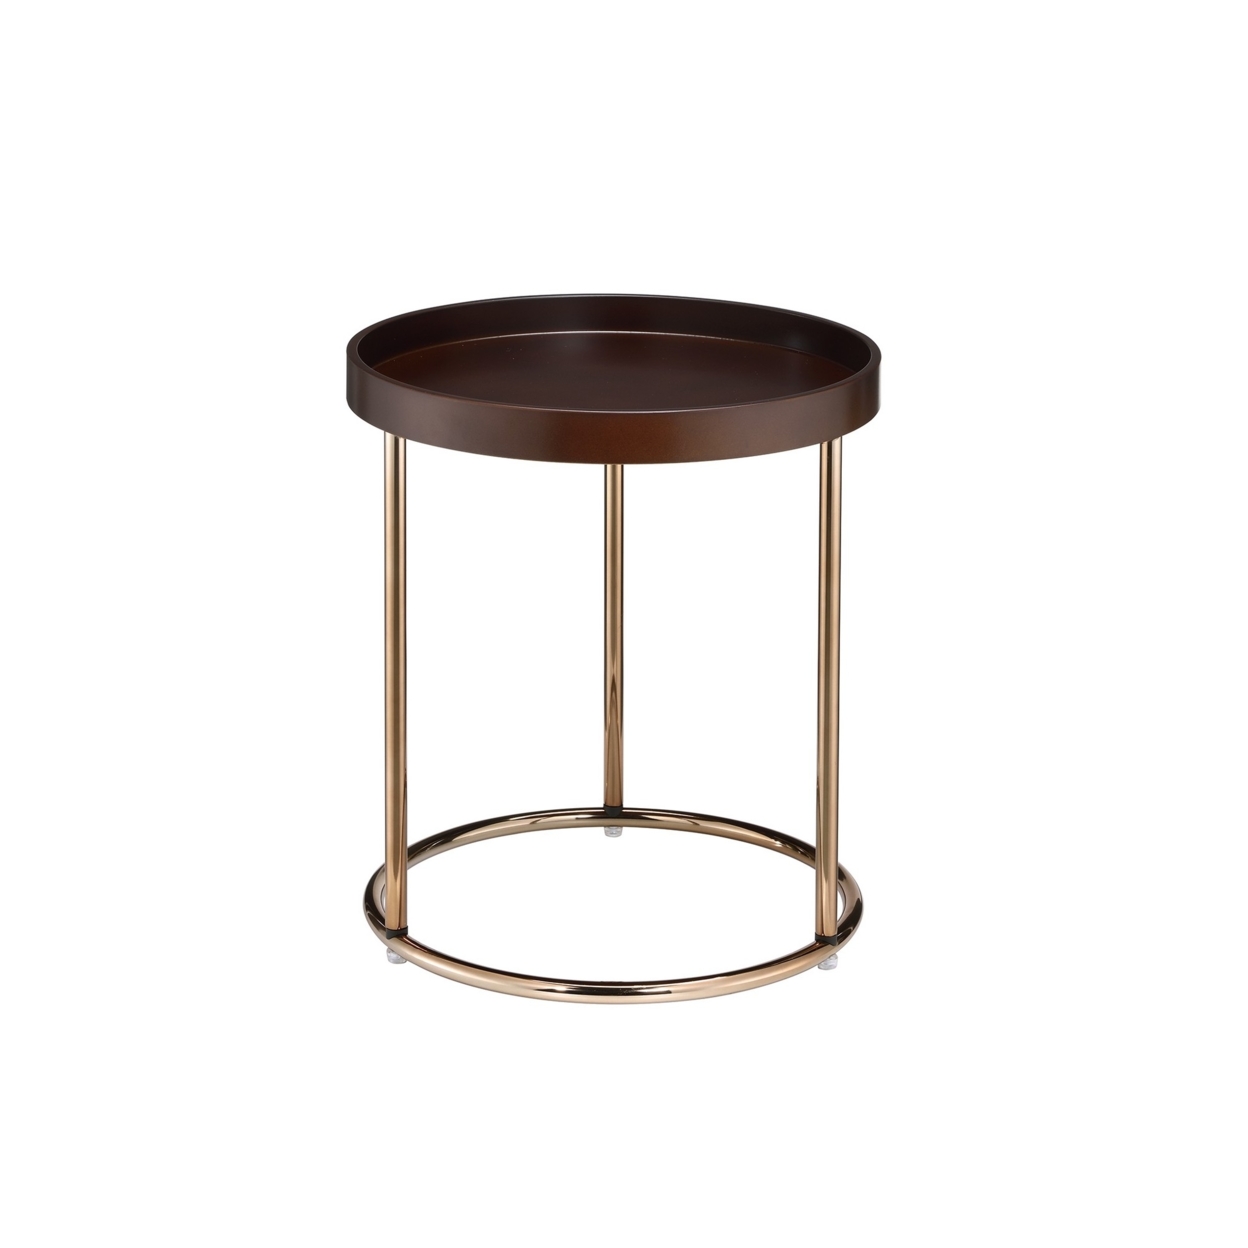 21.75 Inches Wooden Lipped Edge Side Table With Metal Legs, Brown- Saltoro Sherpi